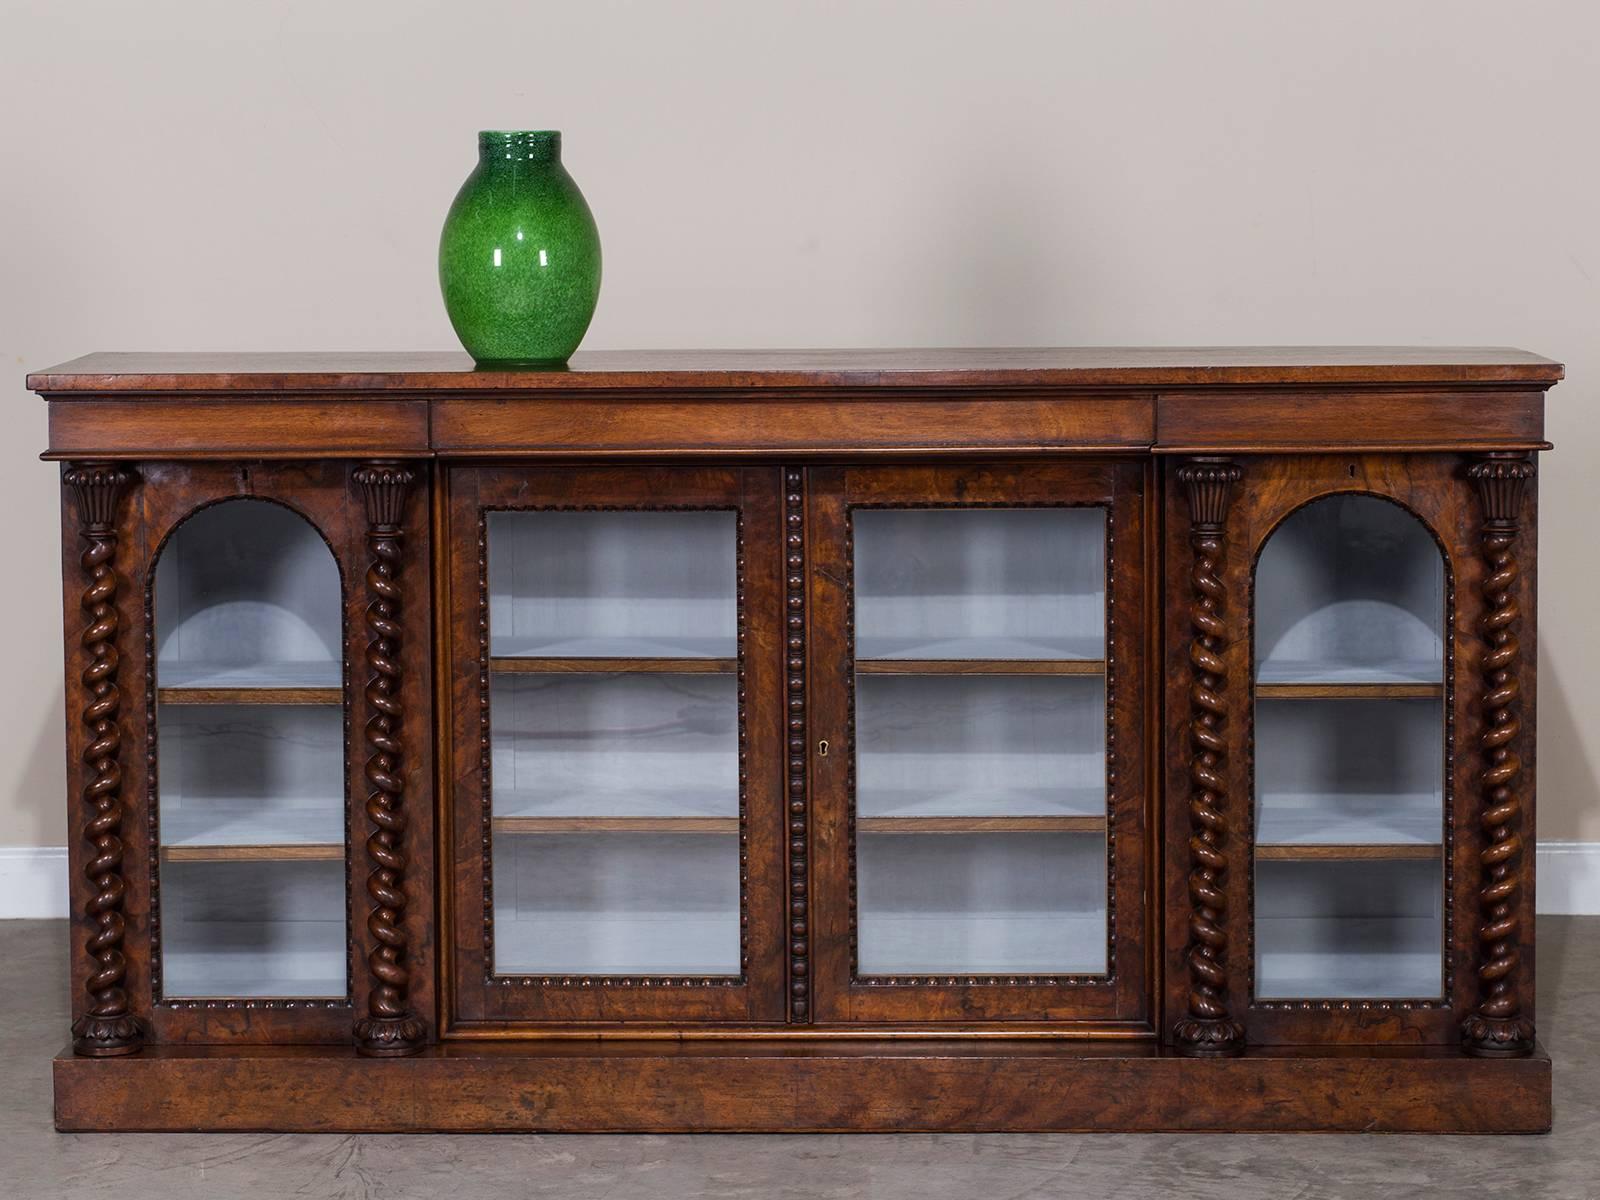 Receive our new selections direct from 1stdibs by email each week. Please click Follow Dealer below and see them first!

The elegant spiral of the barley twist columns add a striking impression to this antique English display cabinet bookcase,